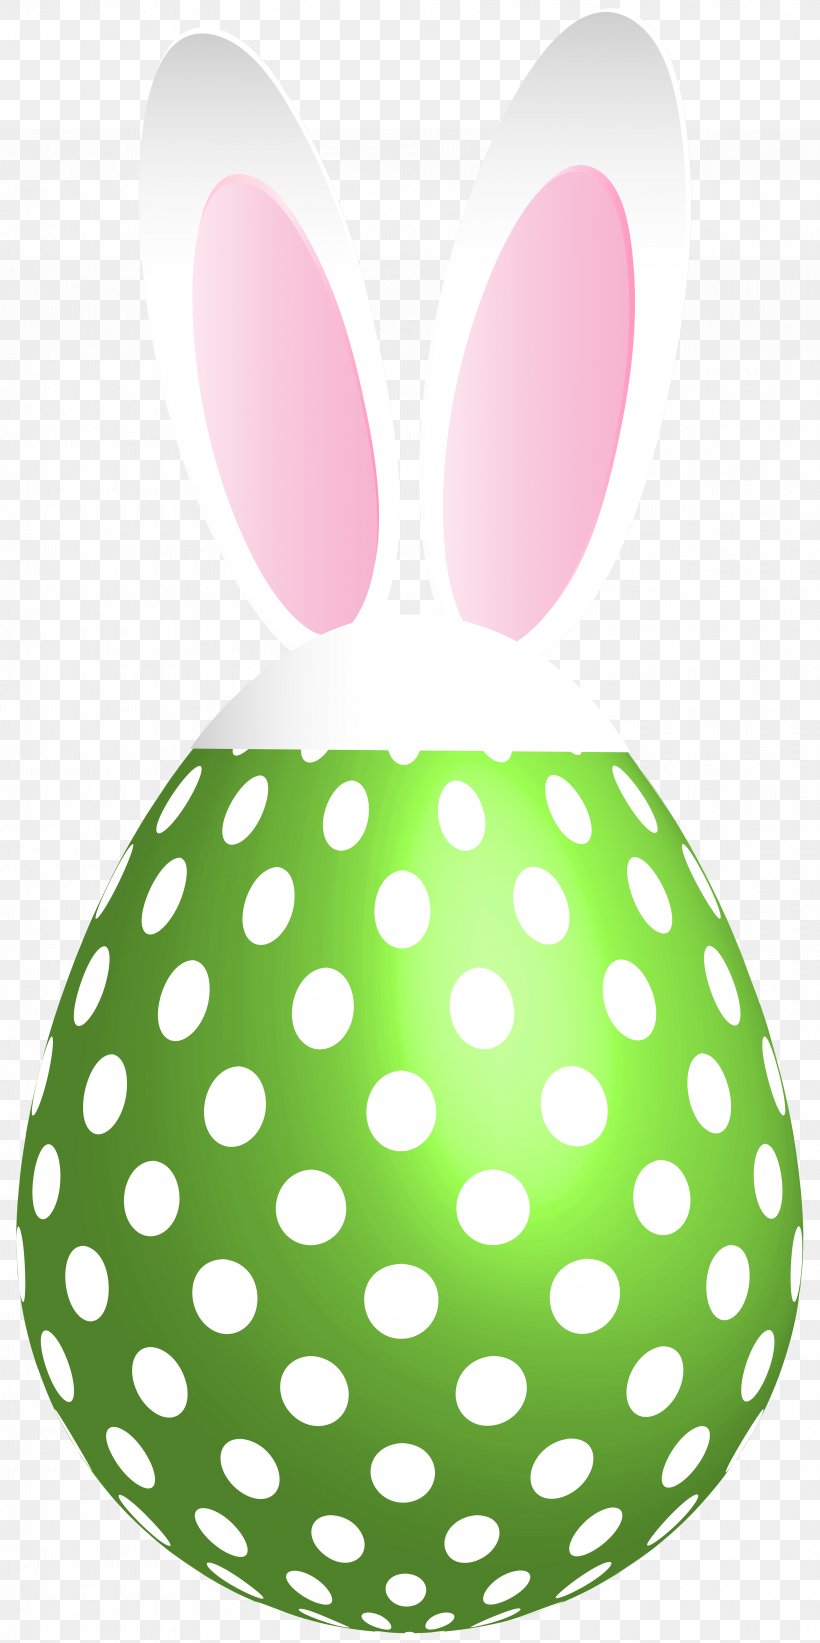 Image File Formats Lossless Compression, PNG, 3992x8000px, Easter Bunny, Christmas, Christmas Decoration, Christmas Ornament, Clip Art Download Free